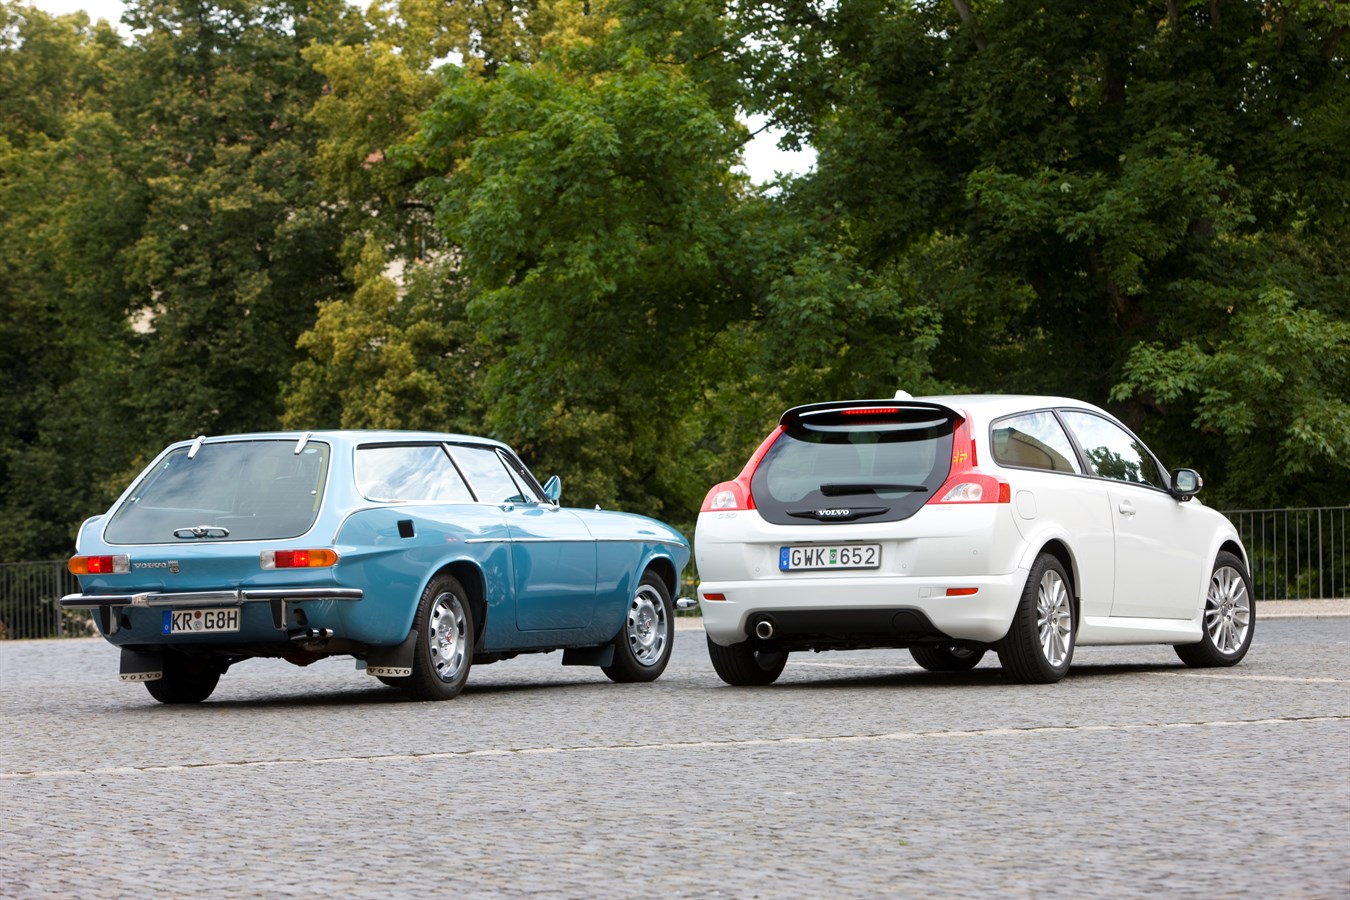 Volvo Cars celebrates 50 years in Germany